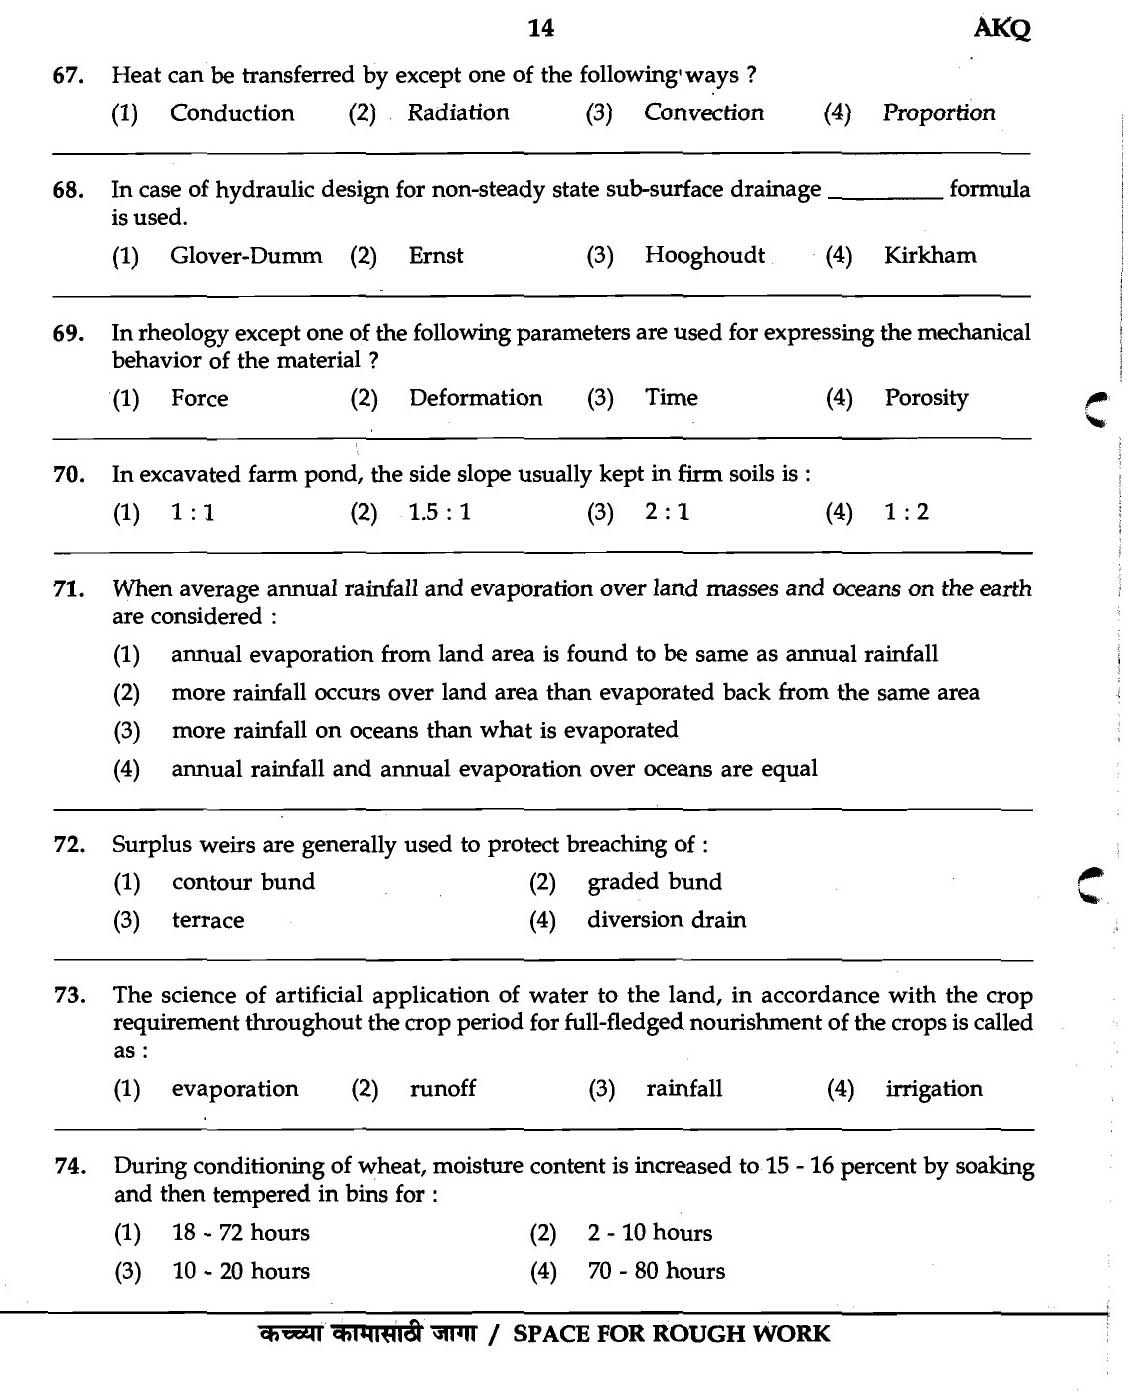 MPSC Agricultural Services Exam 2007 Question Paper Agricultural Engineering 12